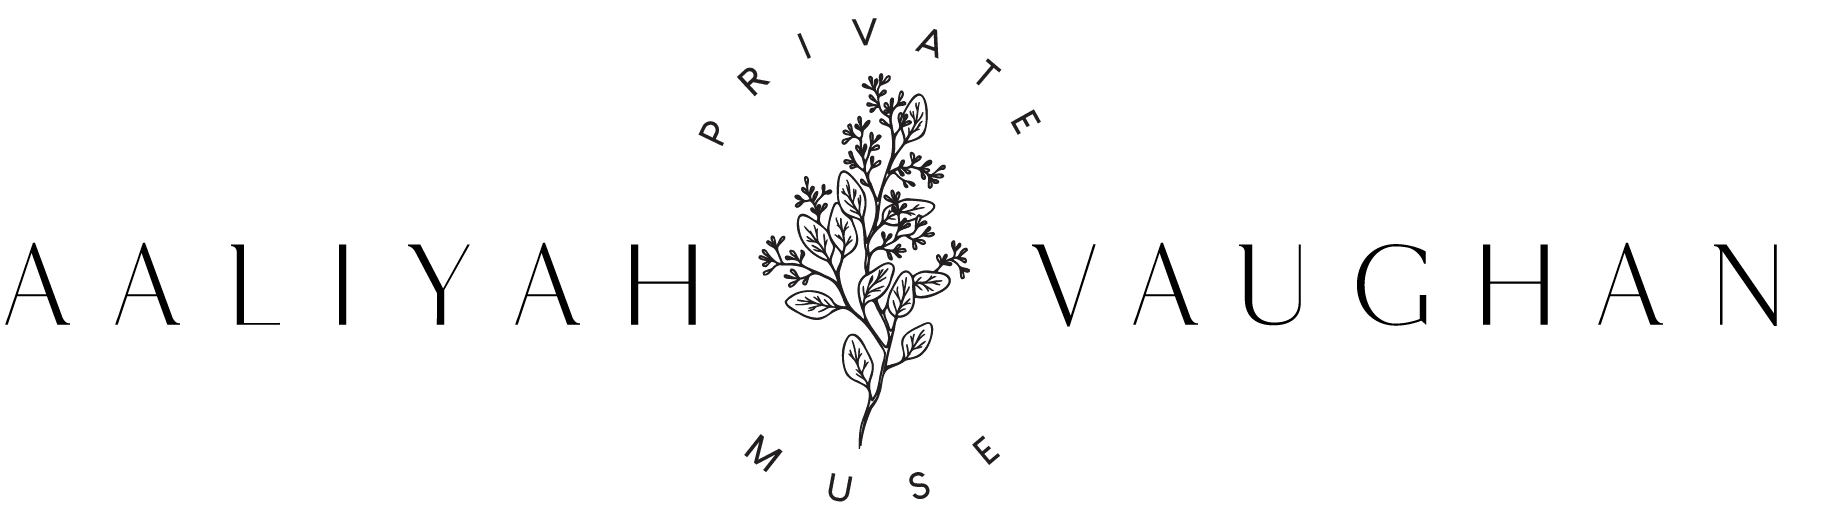 Aaliyah Vaughan | Private Muse & Companion